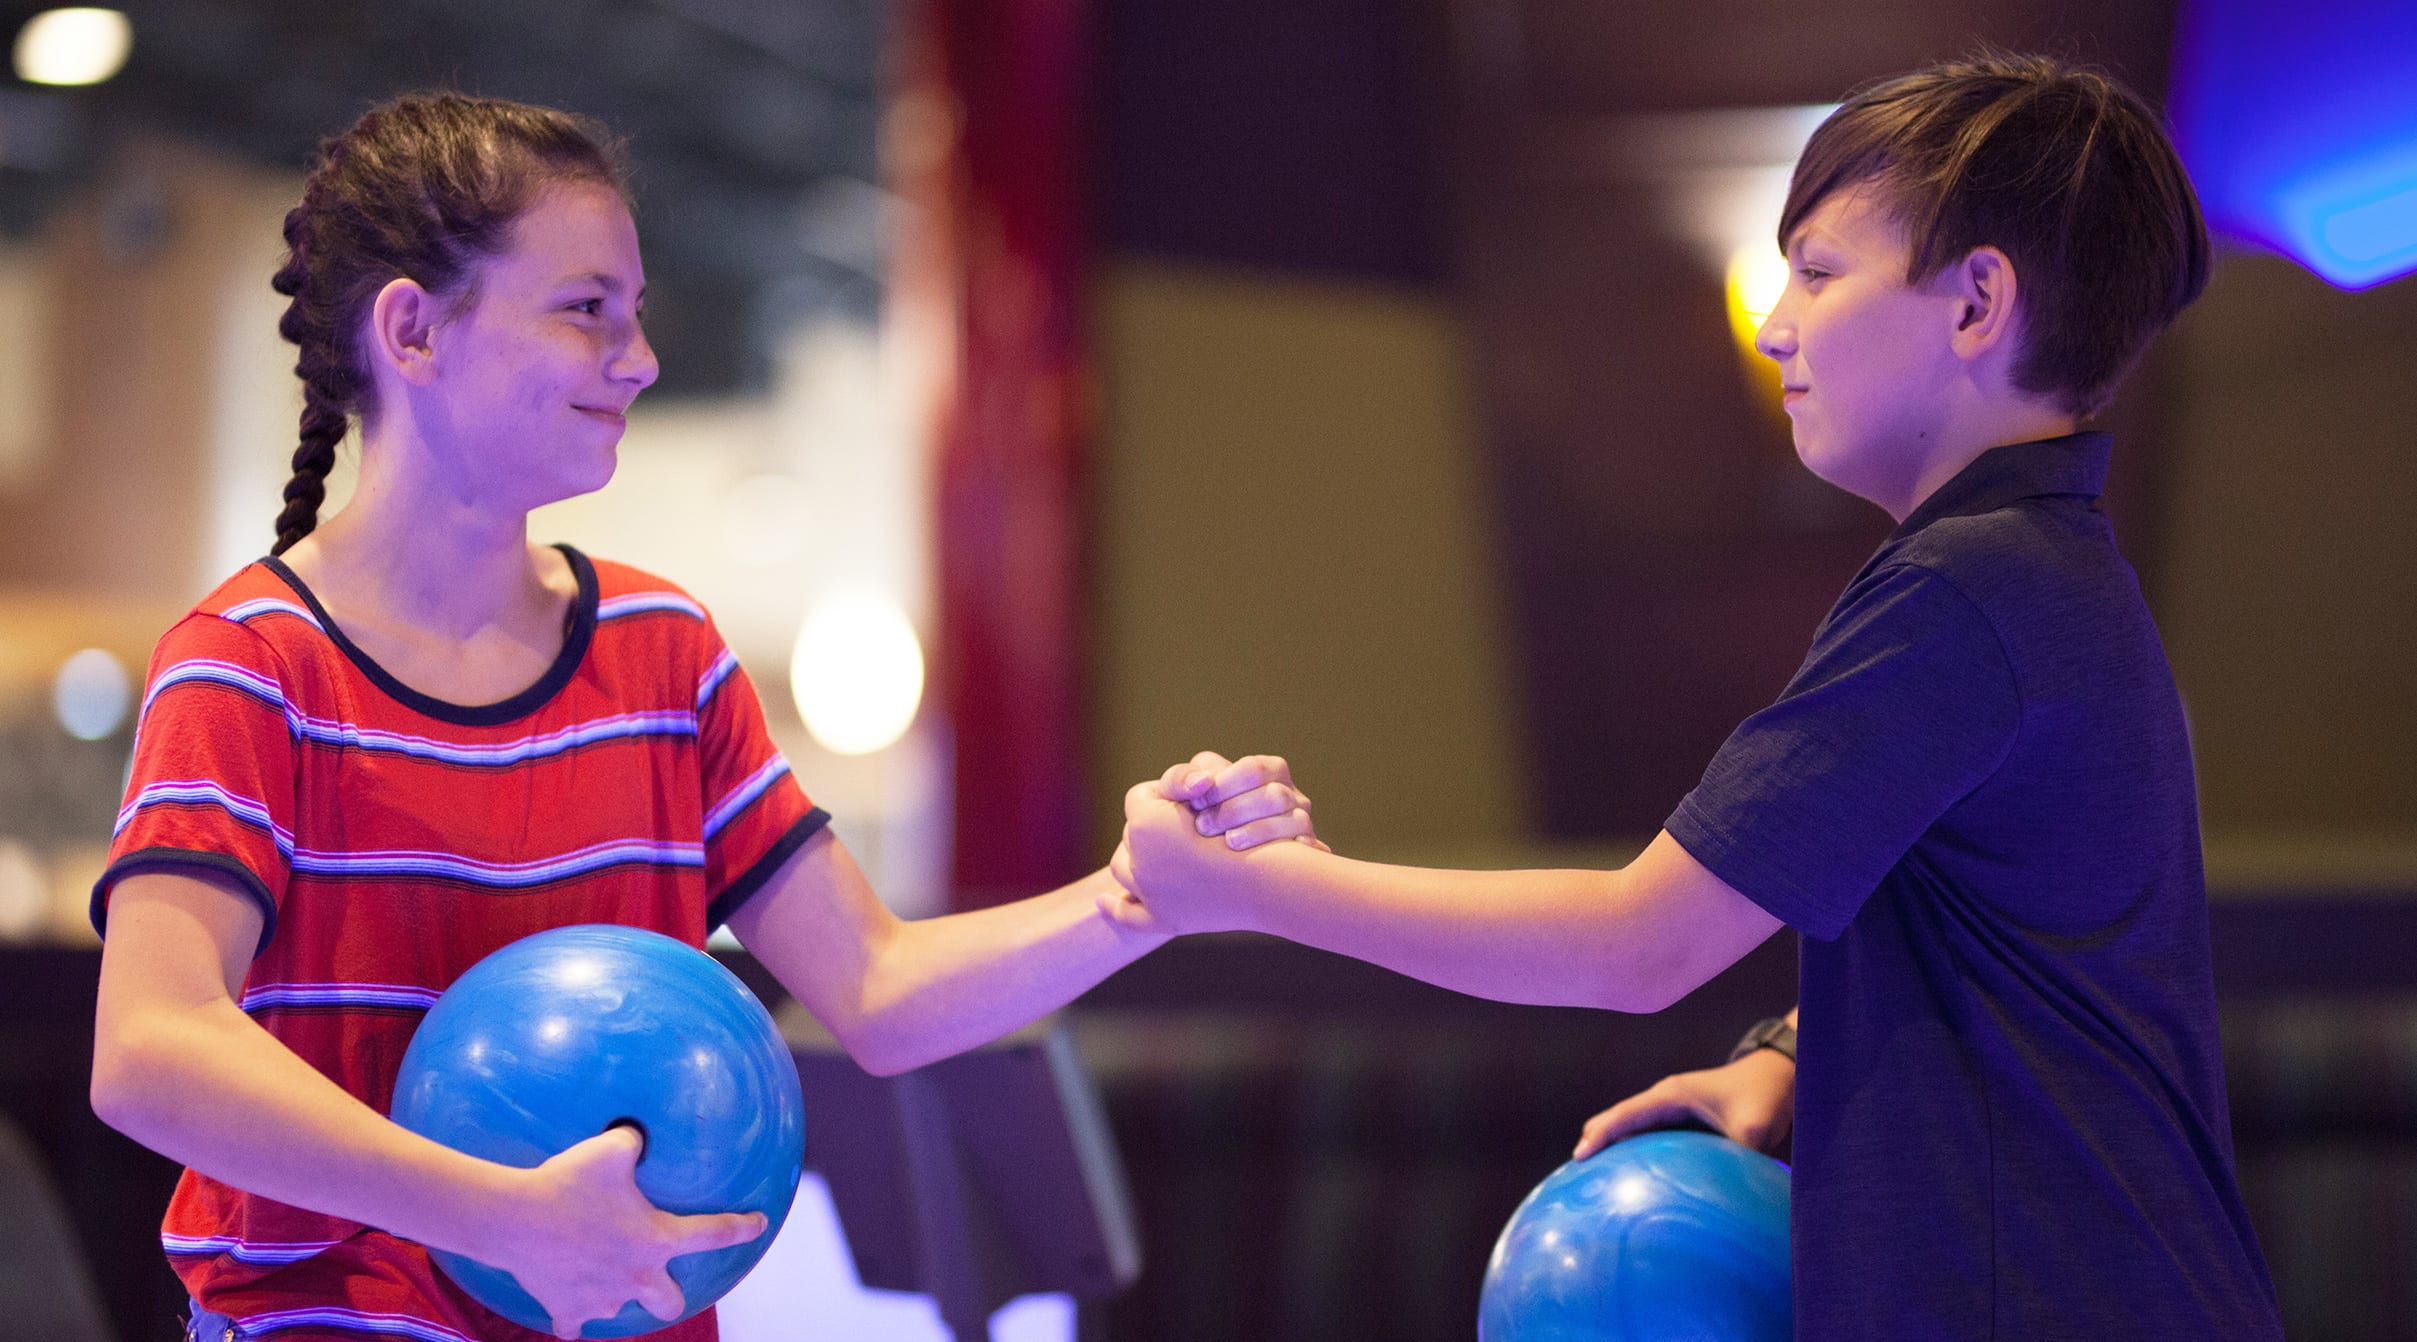 2 Kids shaking hands while each is holding a bowling ball